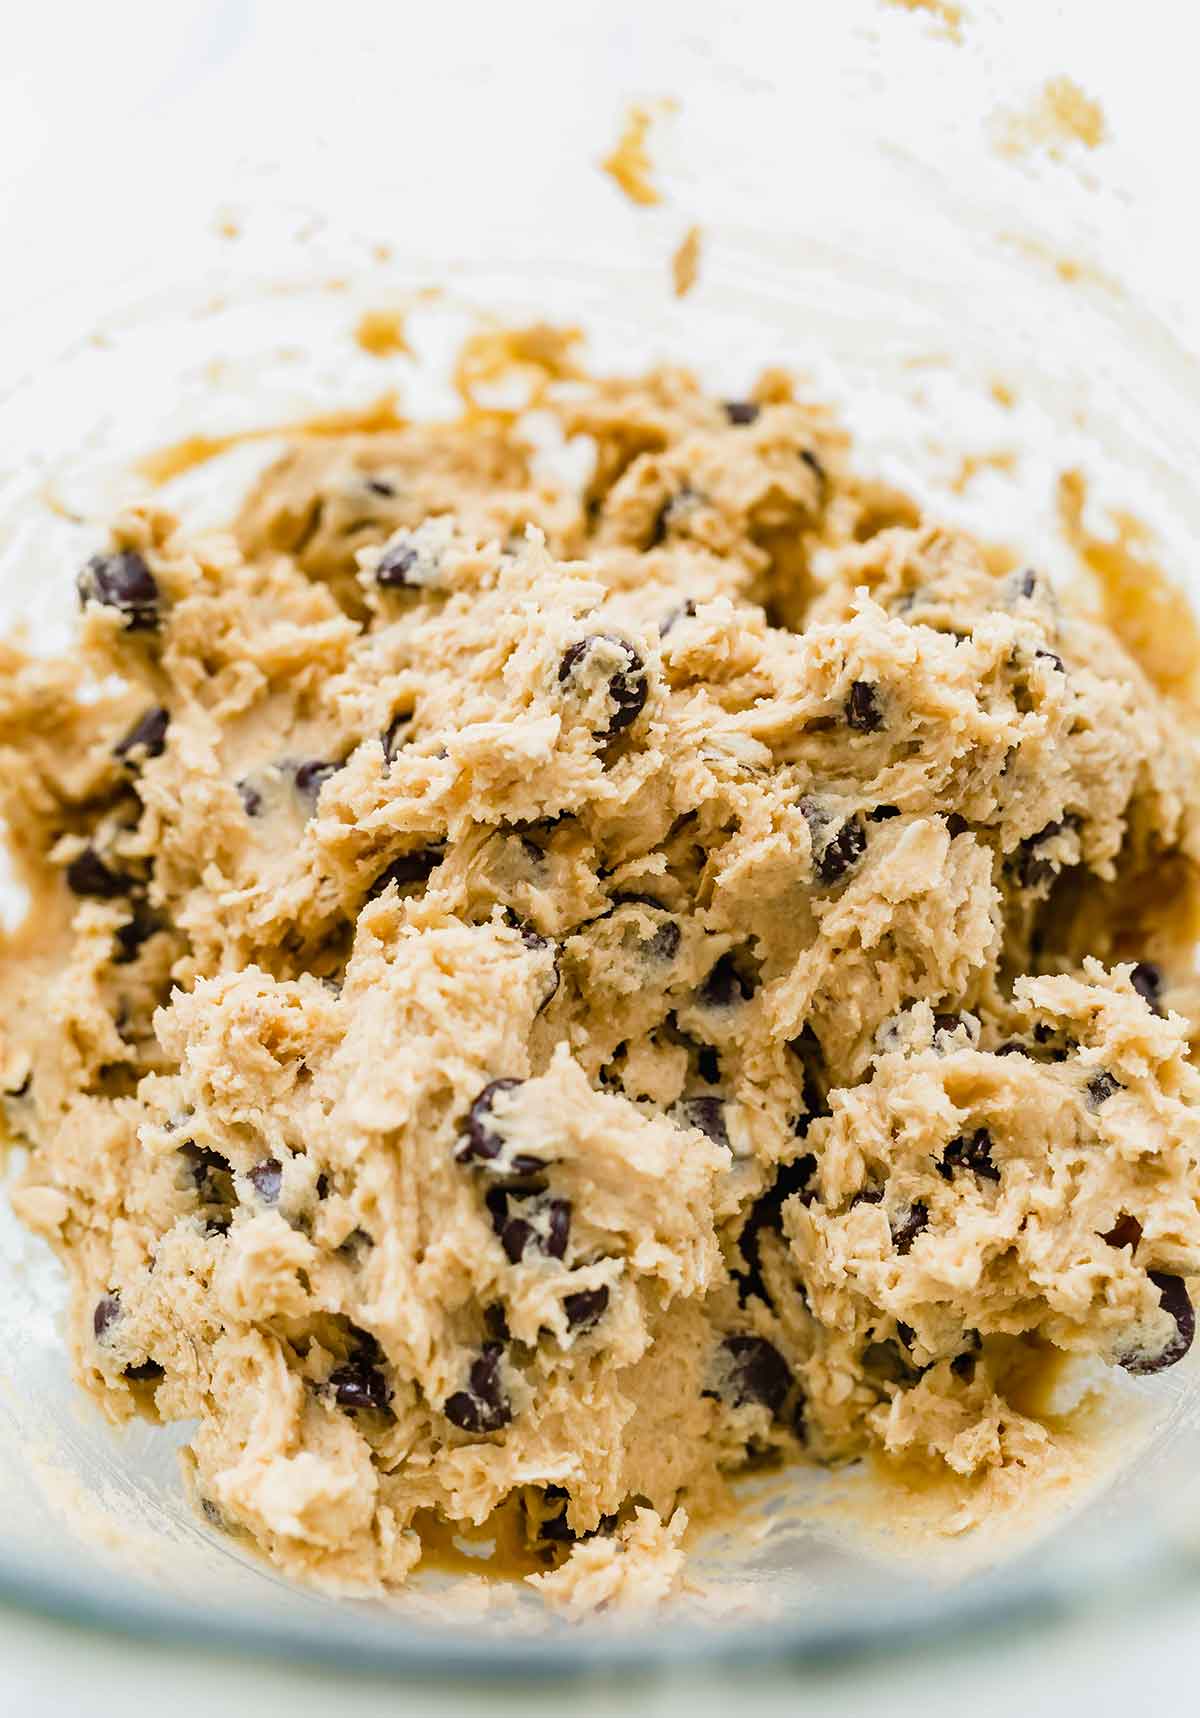 Peanut butter oatmeal chocolate chip cookie dough mixed together in a glass bowl.